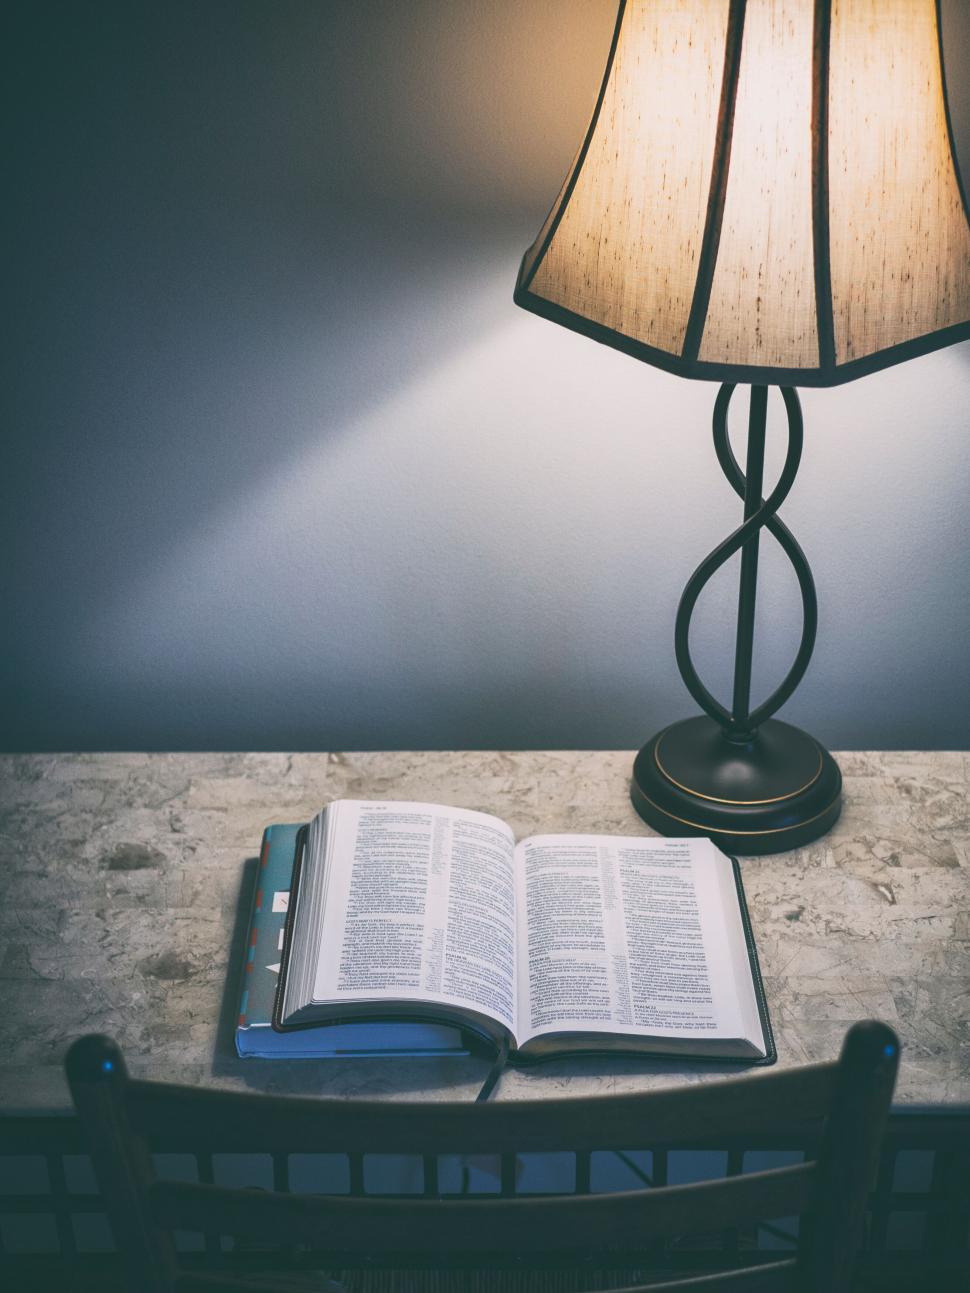 Free Image of A book on a table with a lamp 